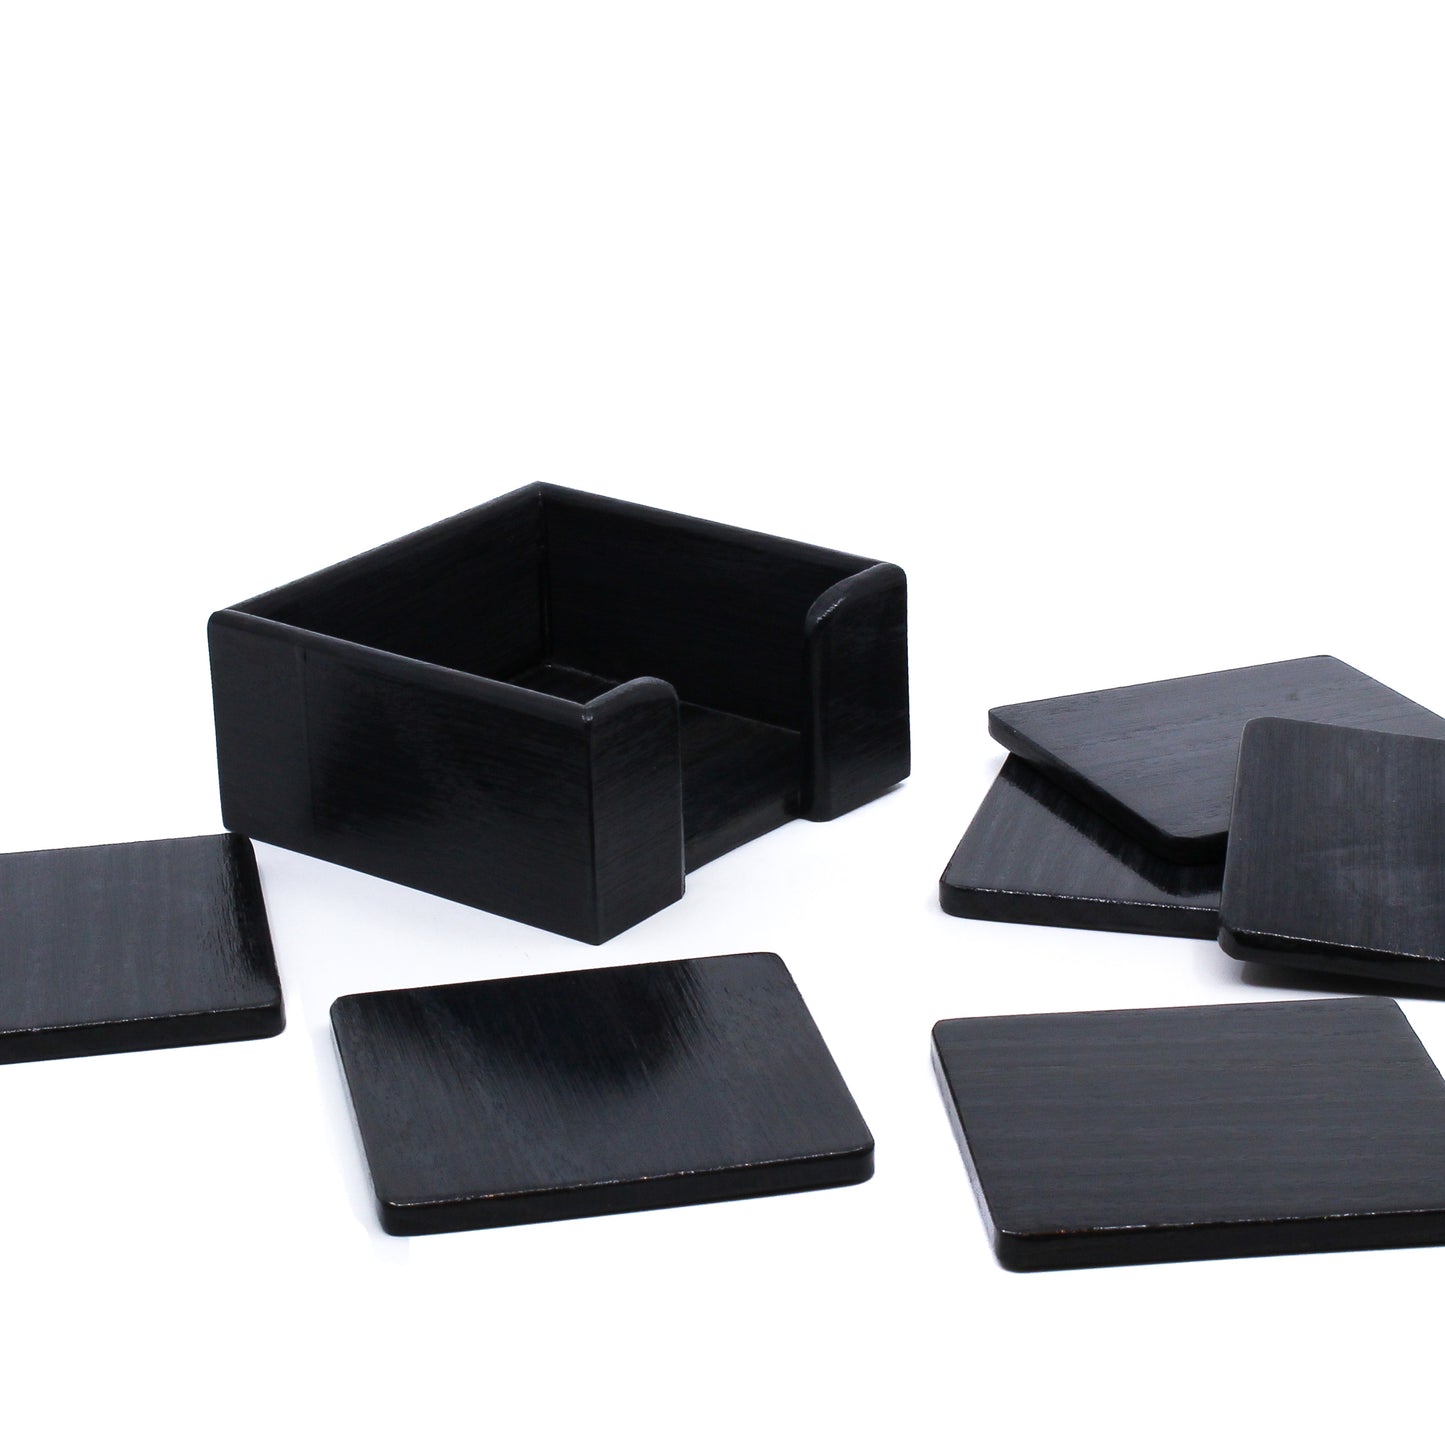 Black coasters and holder